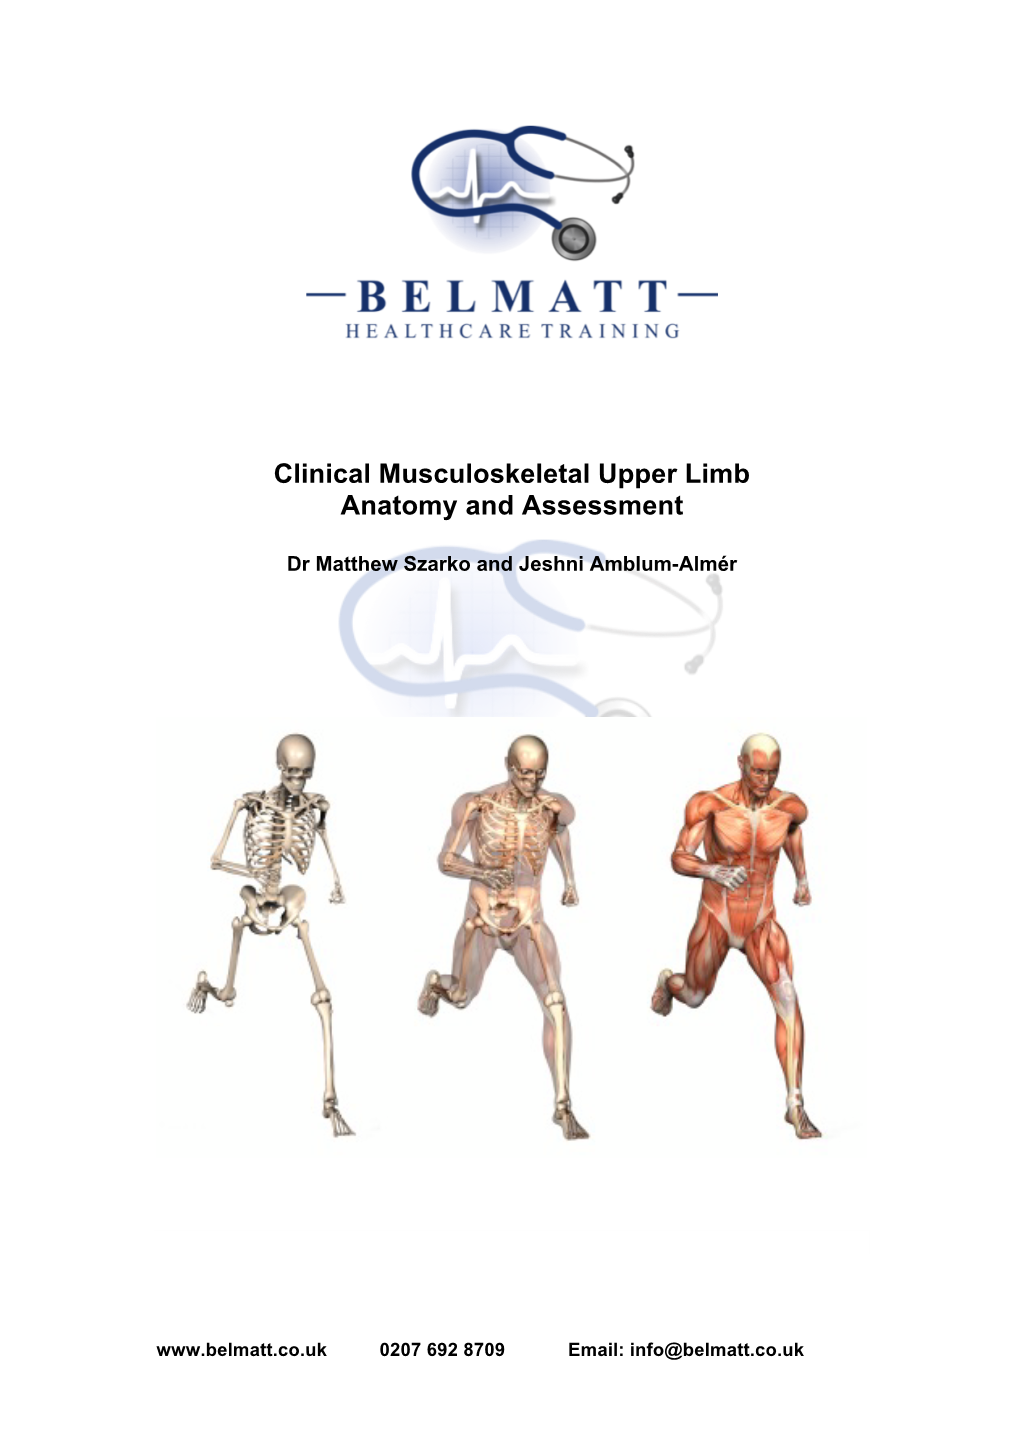 Clinical Musculoskeletal Upper Limb Anatomy and Assessment